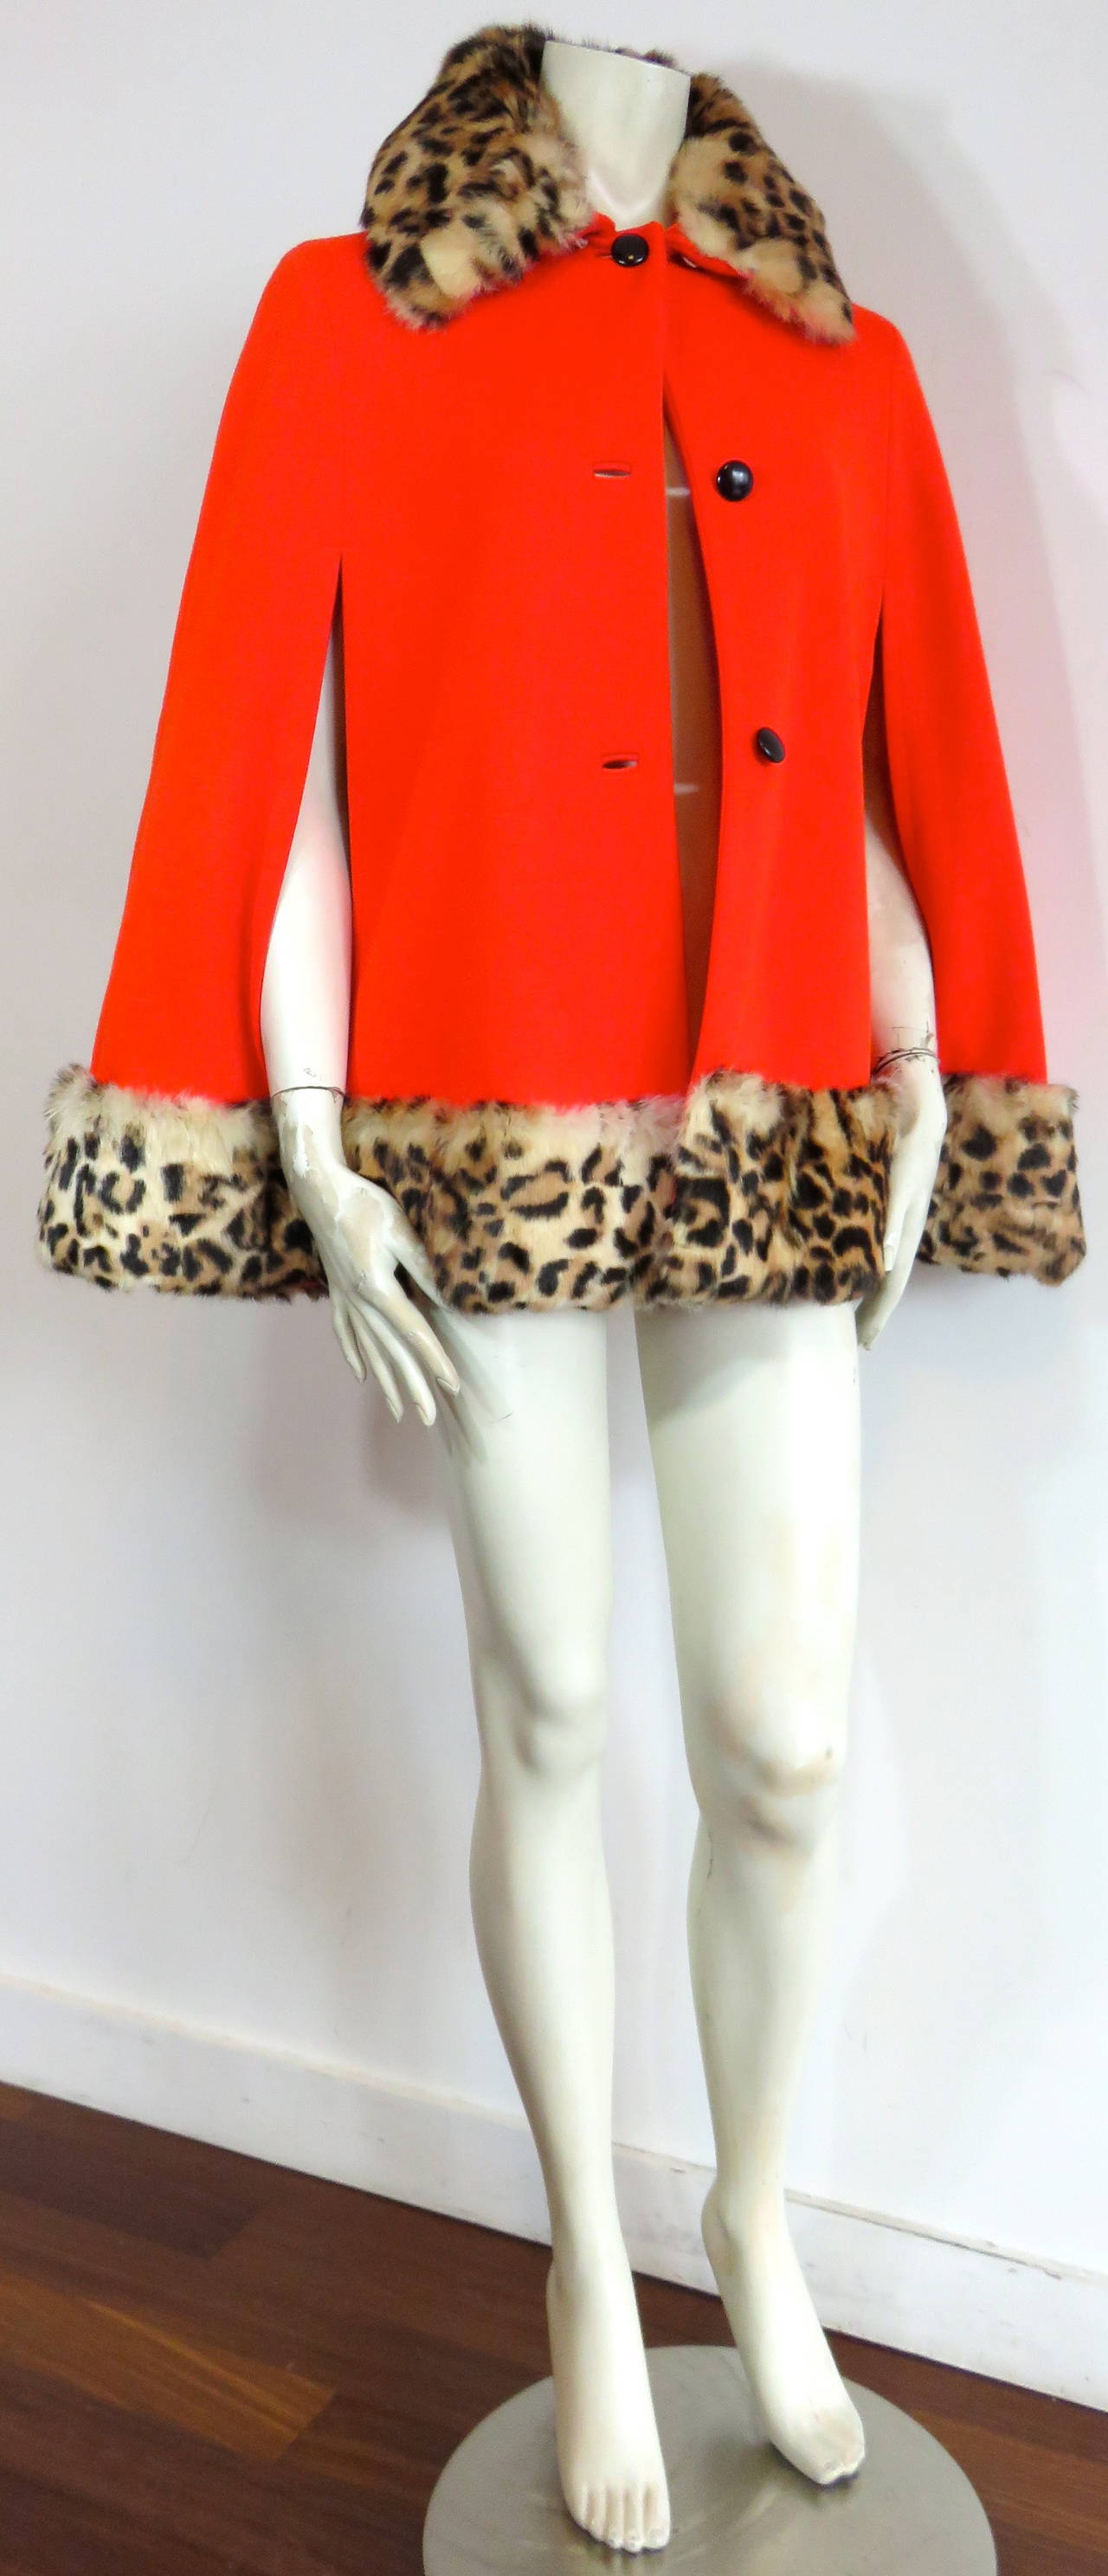 Stunning, 1960's LILLI ANN Fur trimmed, wool knit cape.

Thick, dark tangerine, red-tone wool knit jersey shell with ultra-soft, leopard printed, rabbit-fur collar, and hem trimming.

Long arm slits at front with smooth, black leather-faced dome